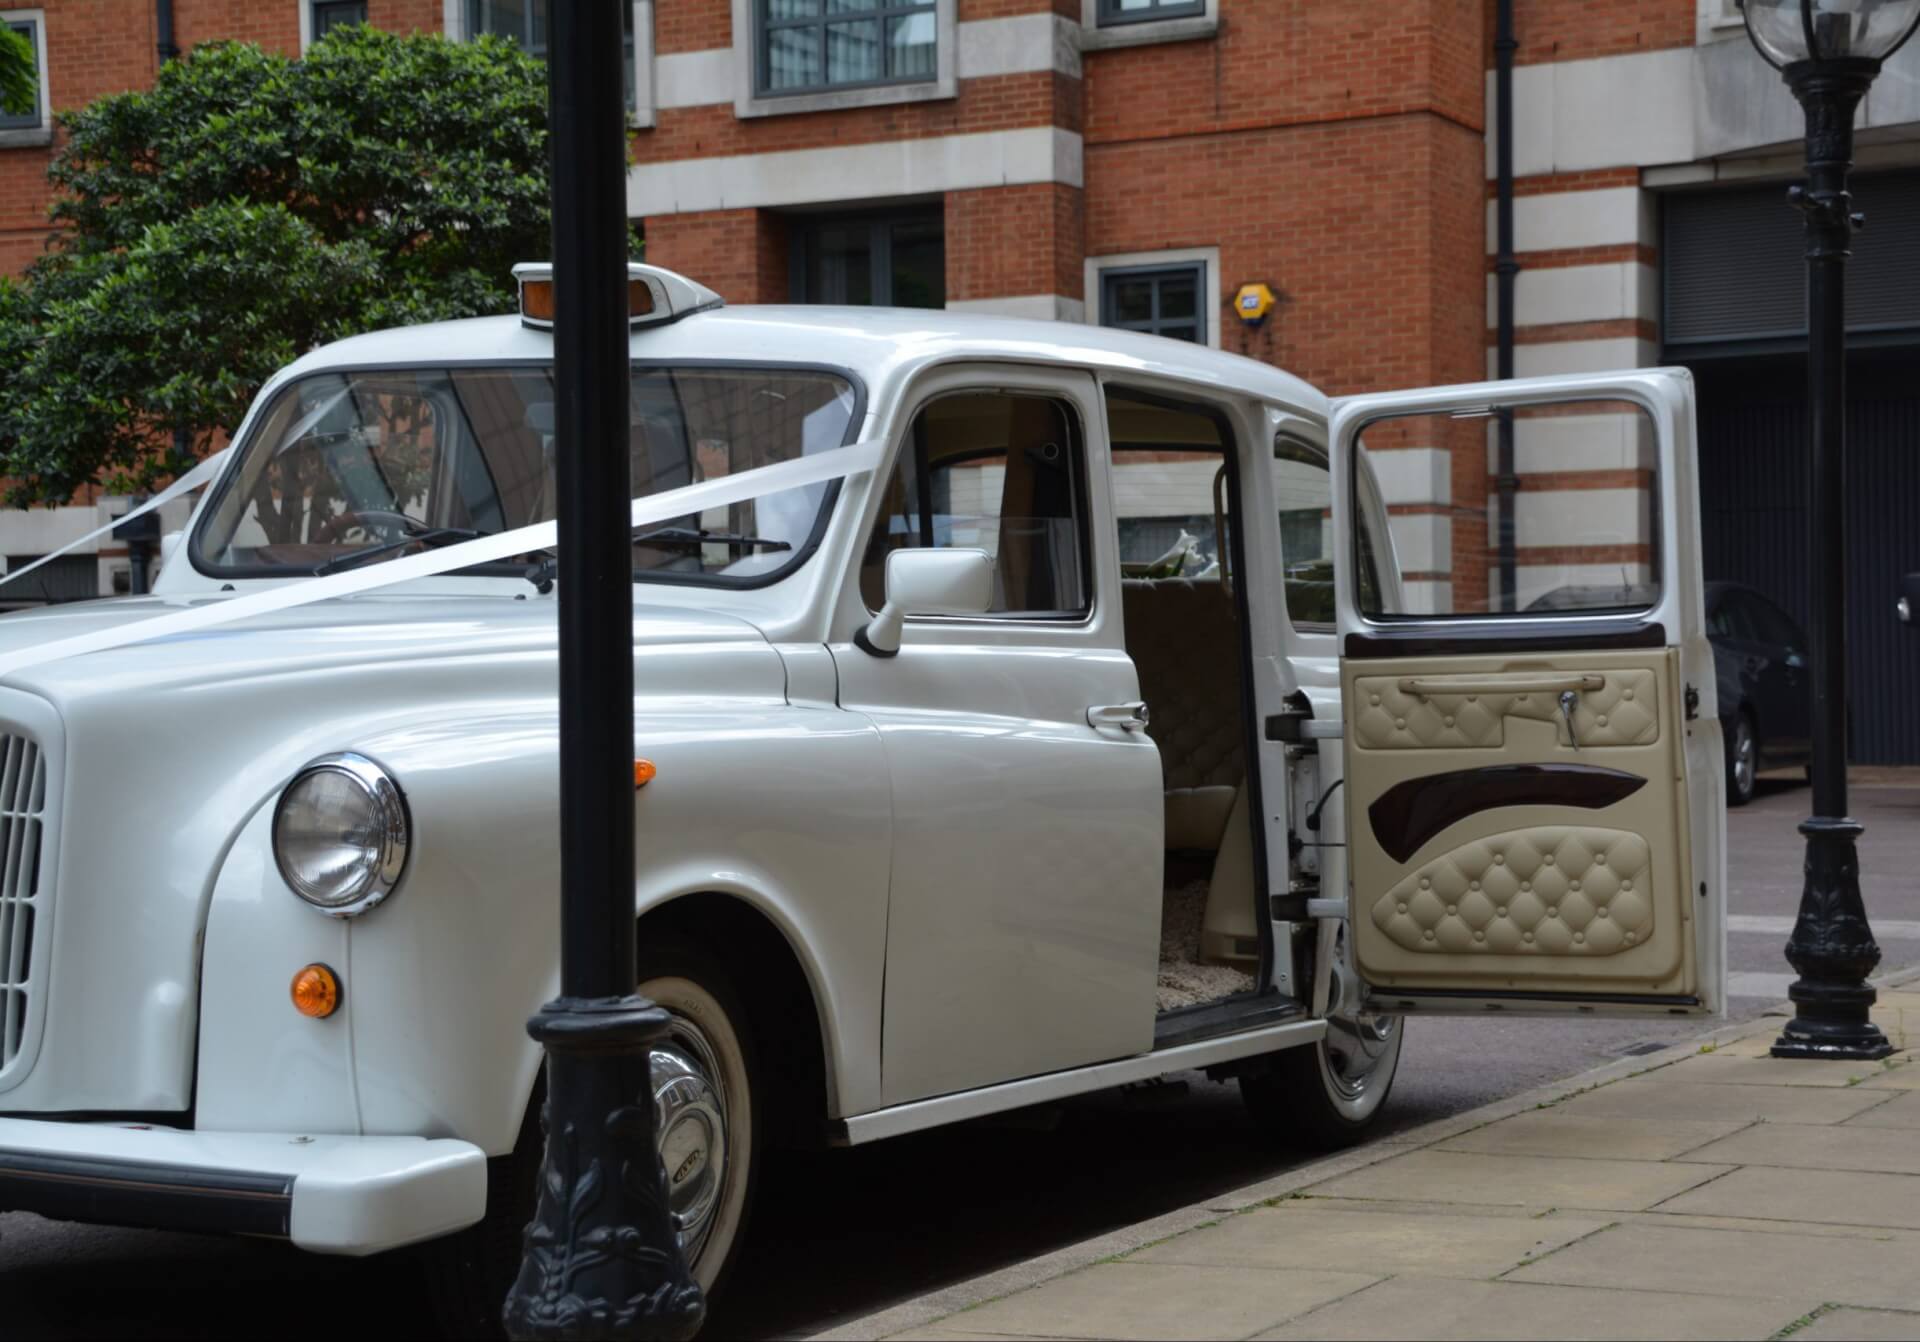 London taxi hire